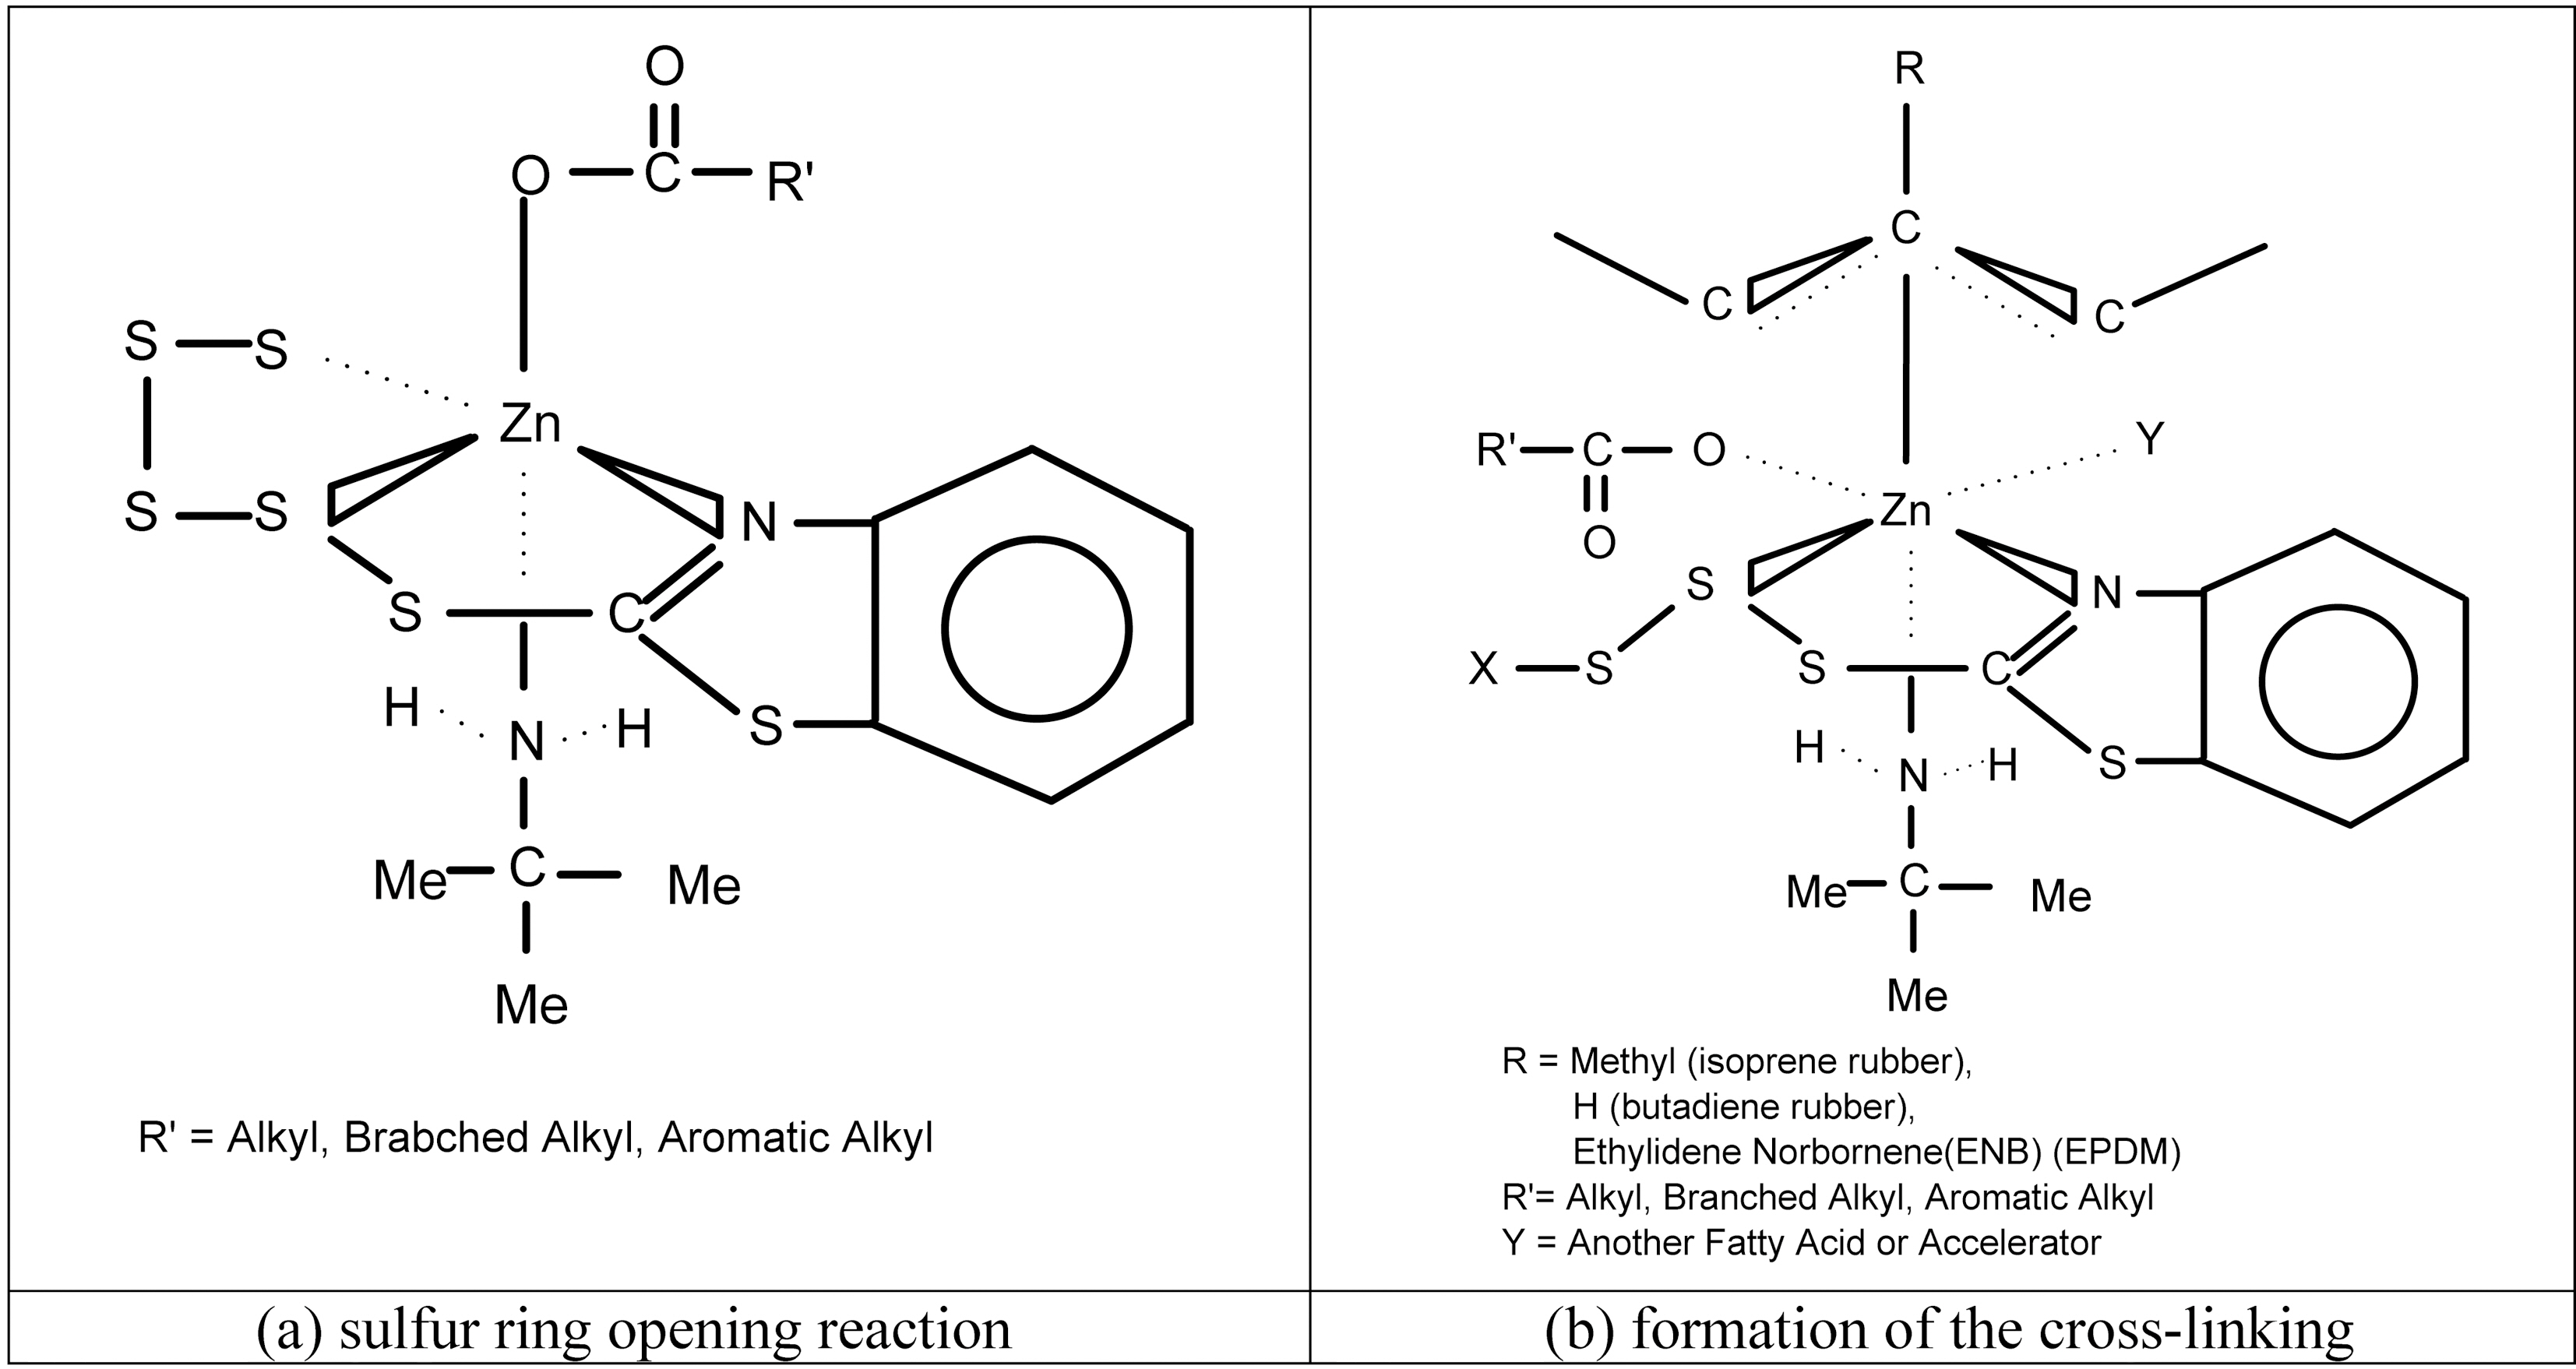 (a) Sulfur ring opening reaction and (b) the formation of the cross-linking [7].